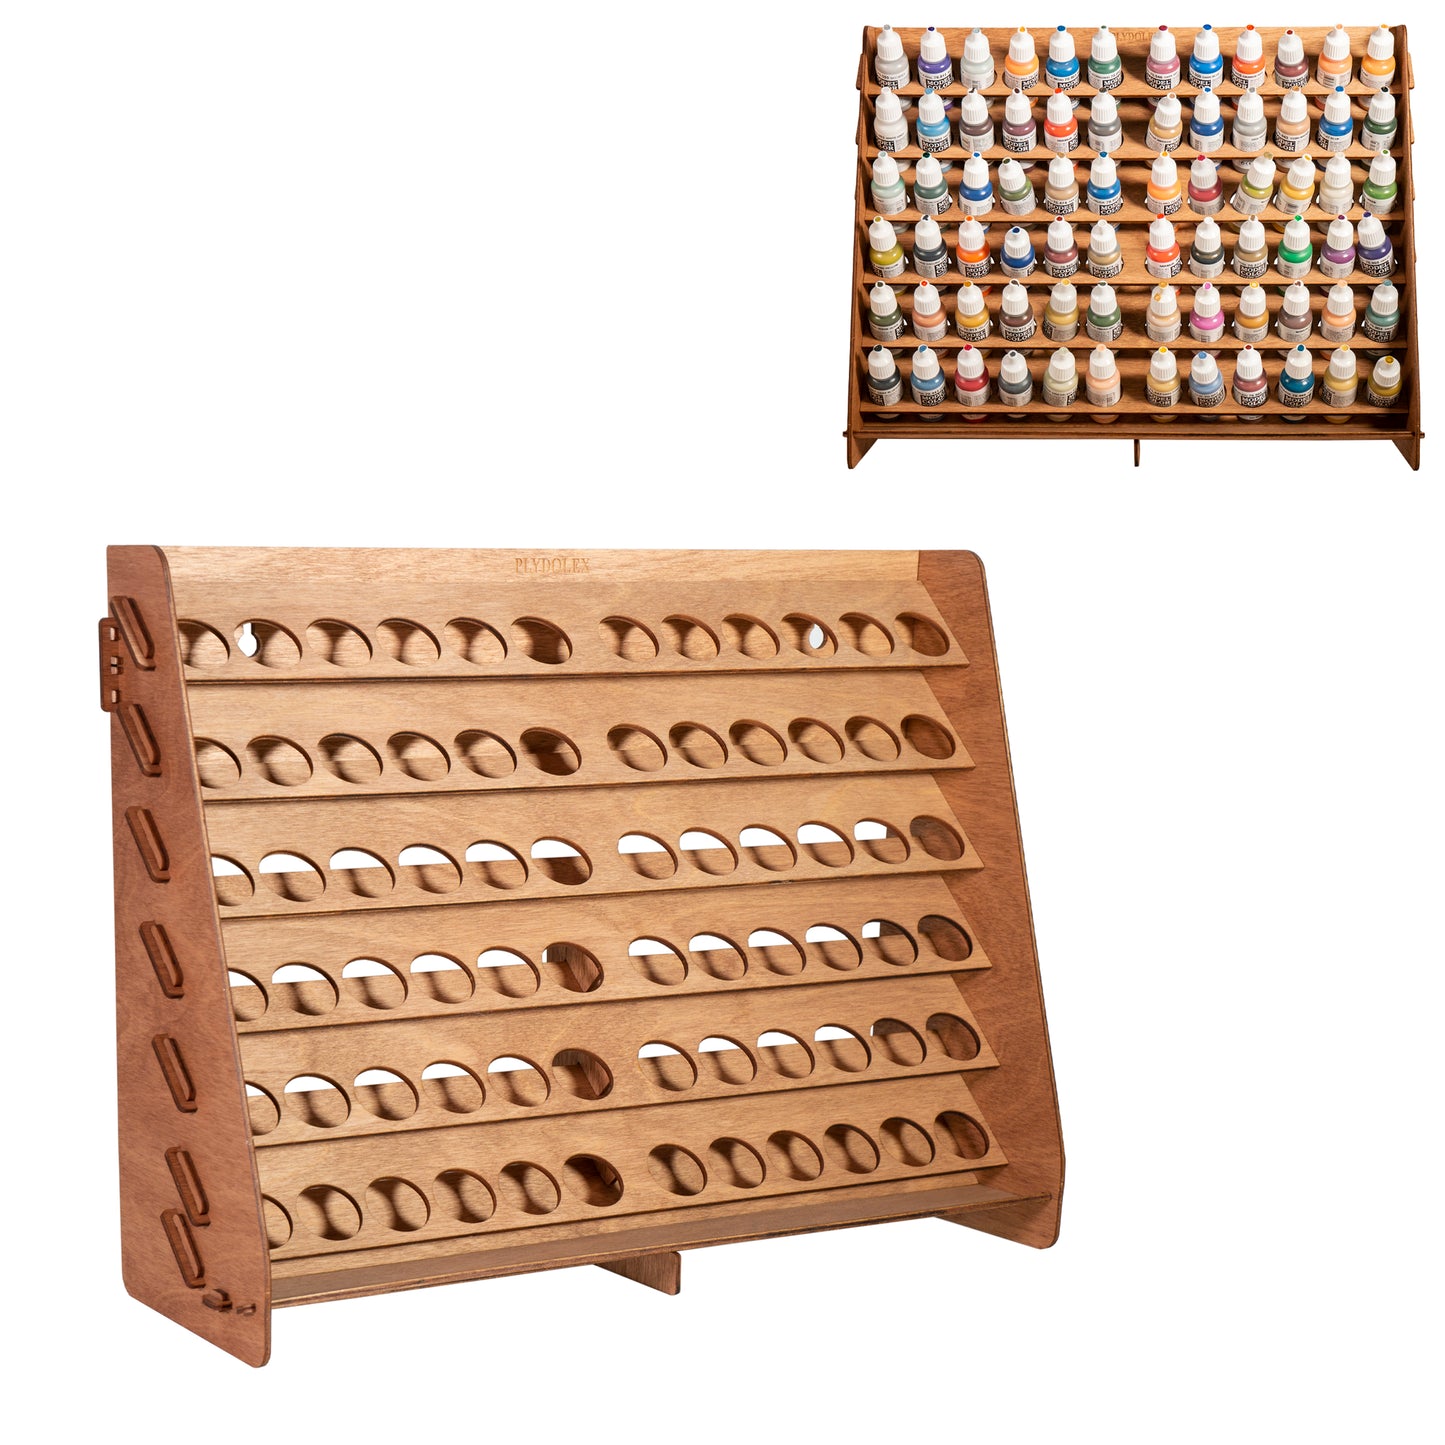 PLYDOLEX Paint Rack Organizer with 65 Holes of 2 Sizes for Miniature Paint  Set – Plywood Organizers for Miniaute Painters - Wooden HandCraft Gift and  Accessories by Plydolex